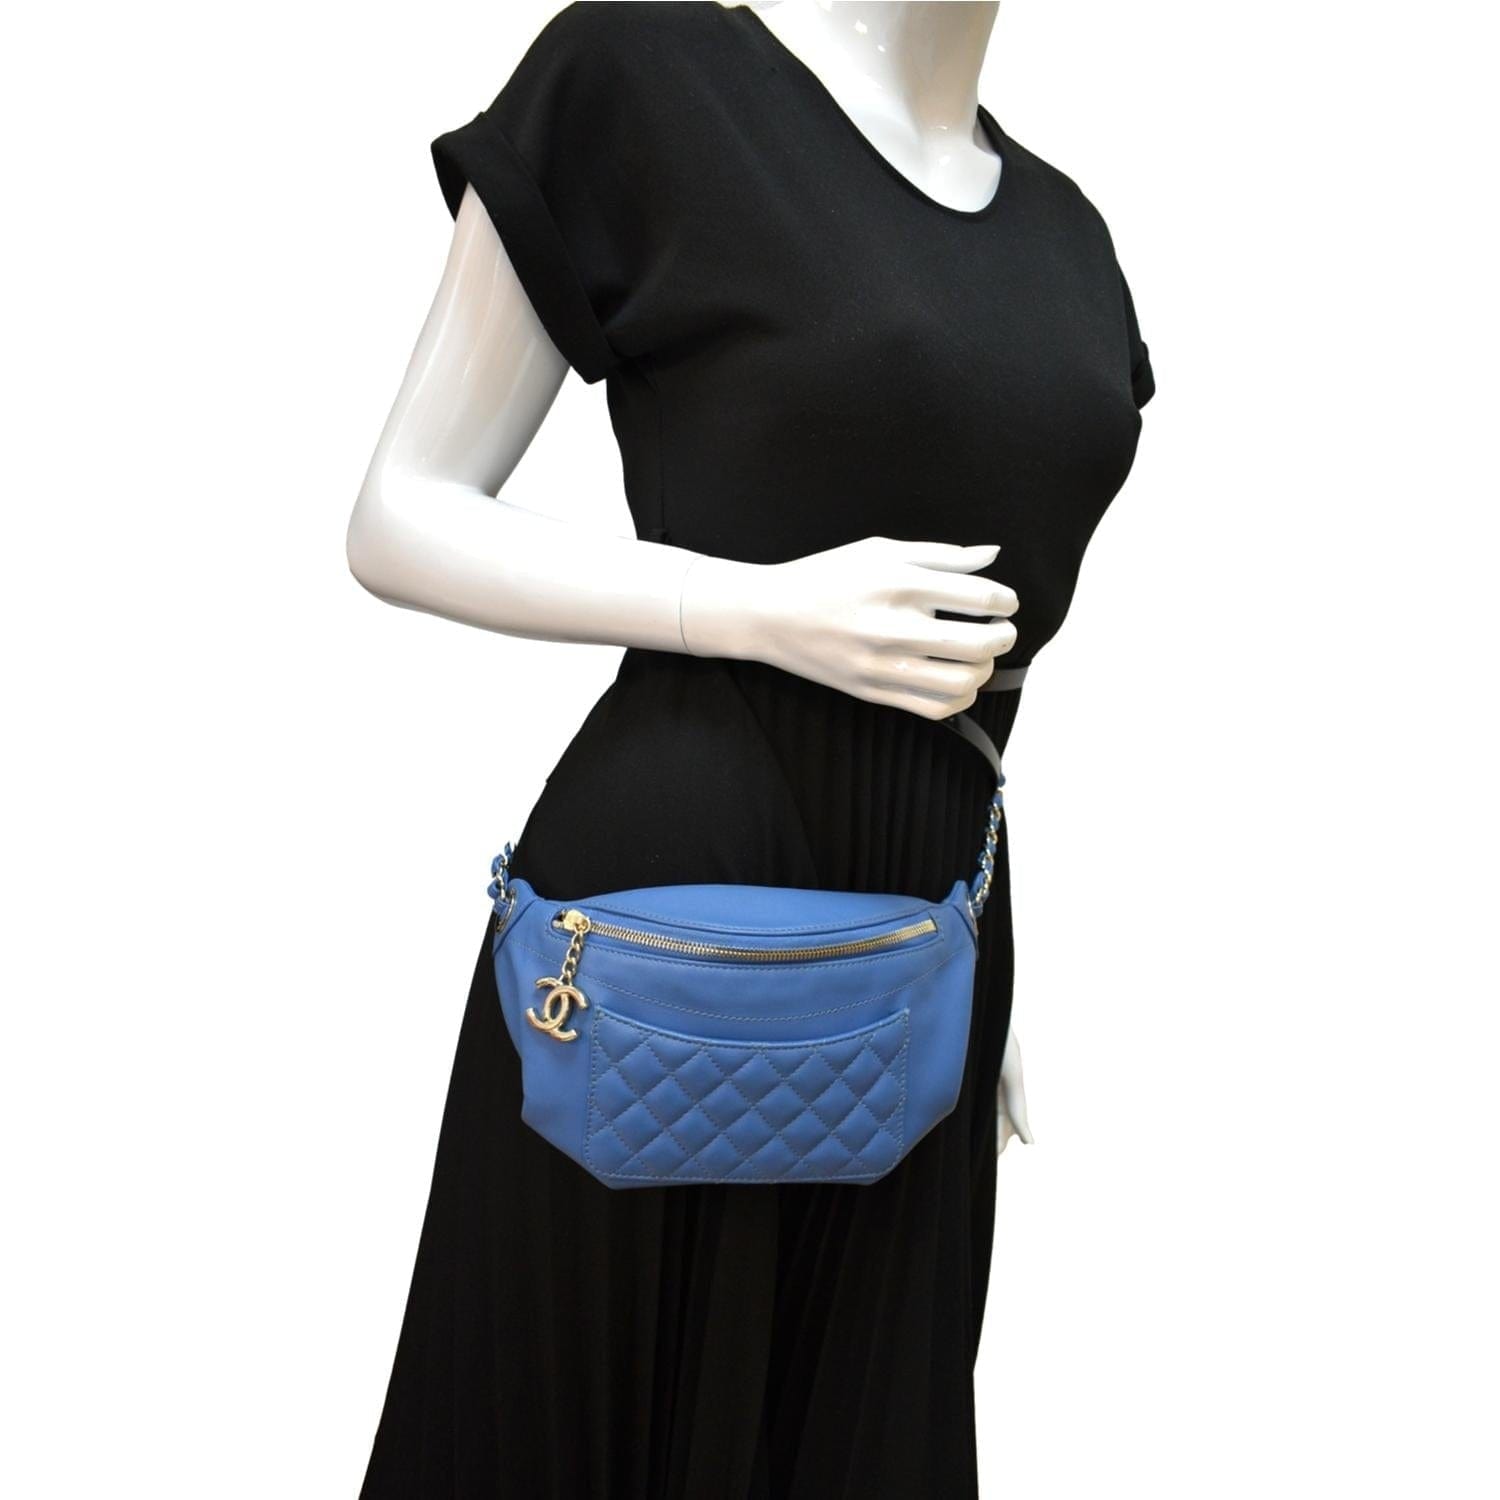 Chanel 19C Royal Blue Waist Belt Bag, Fanny Pack (Box, Dustbag & Card) –  Watch & Jewelry Exchange